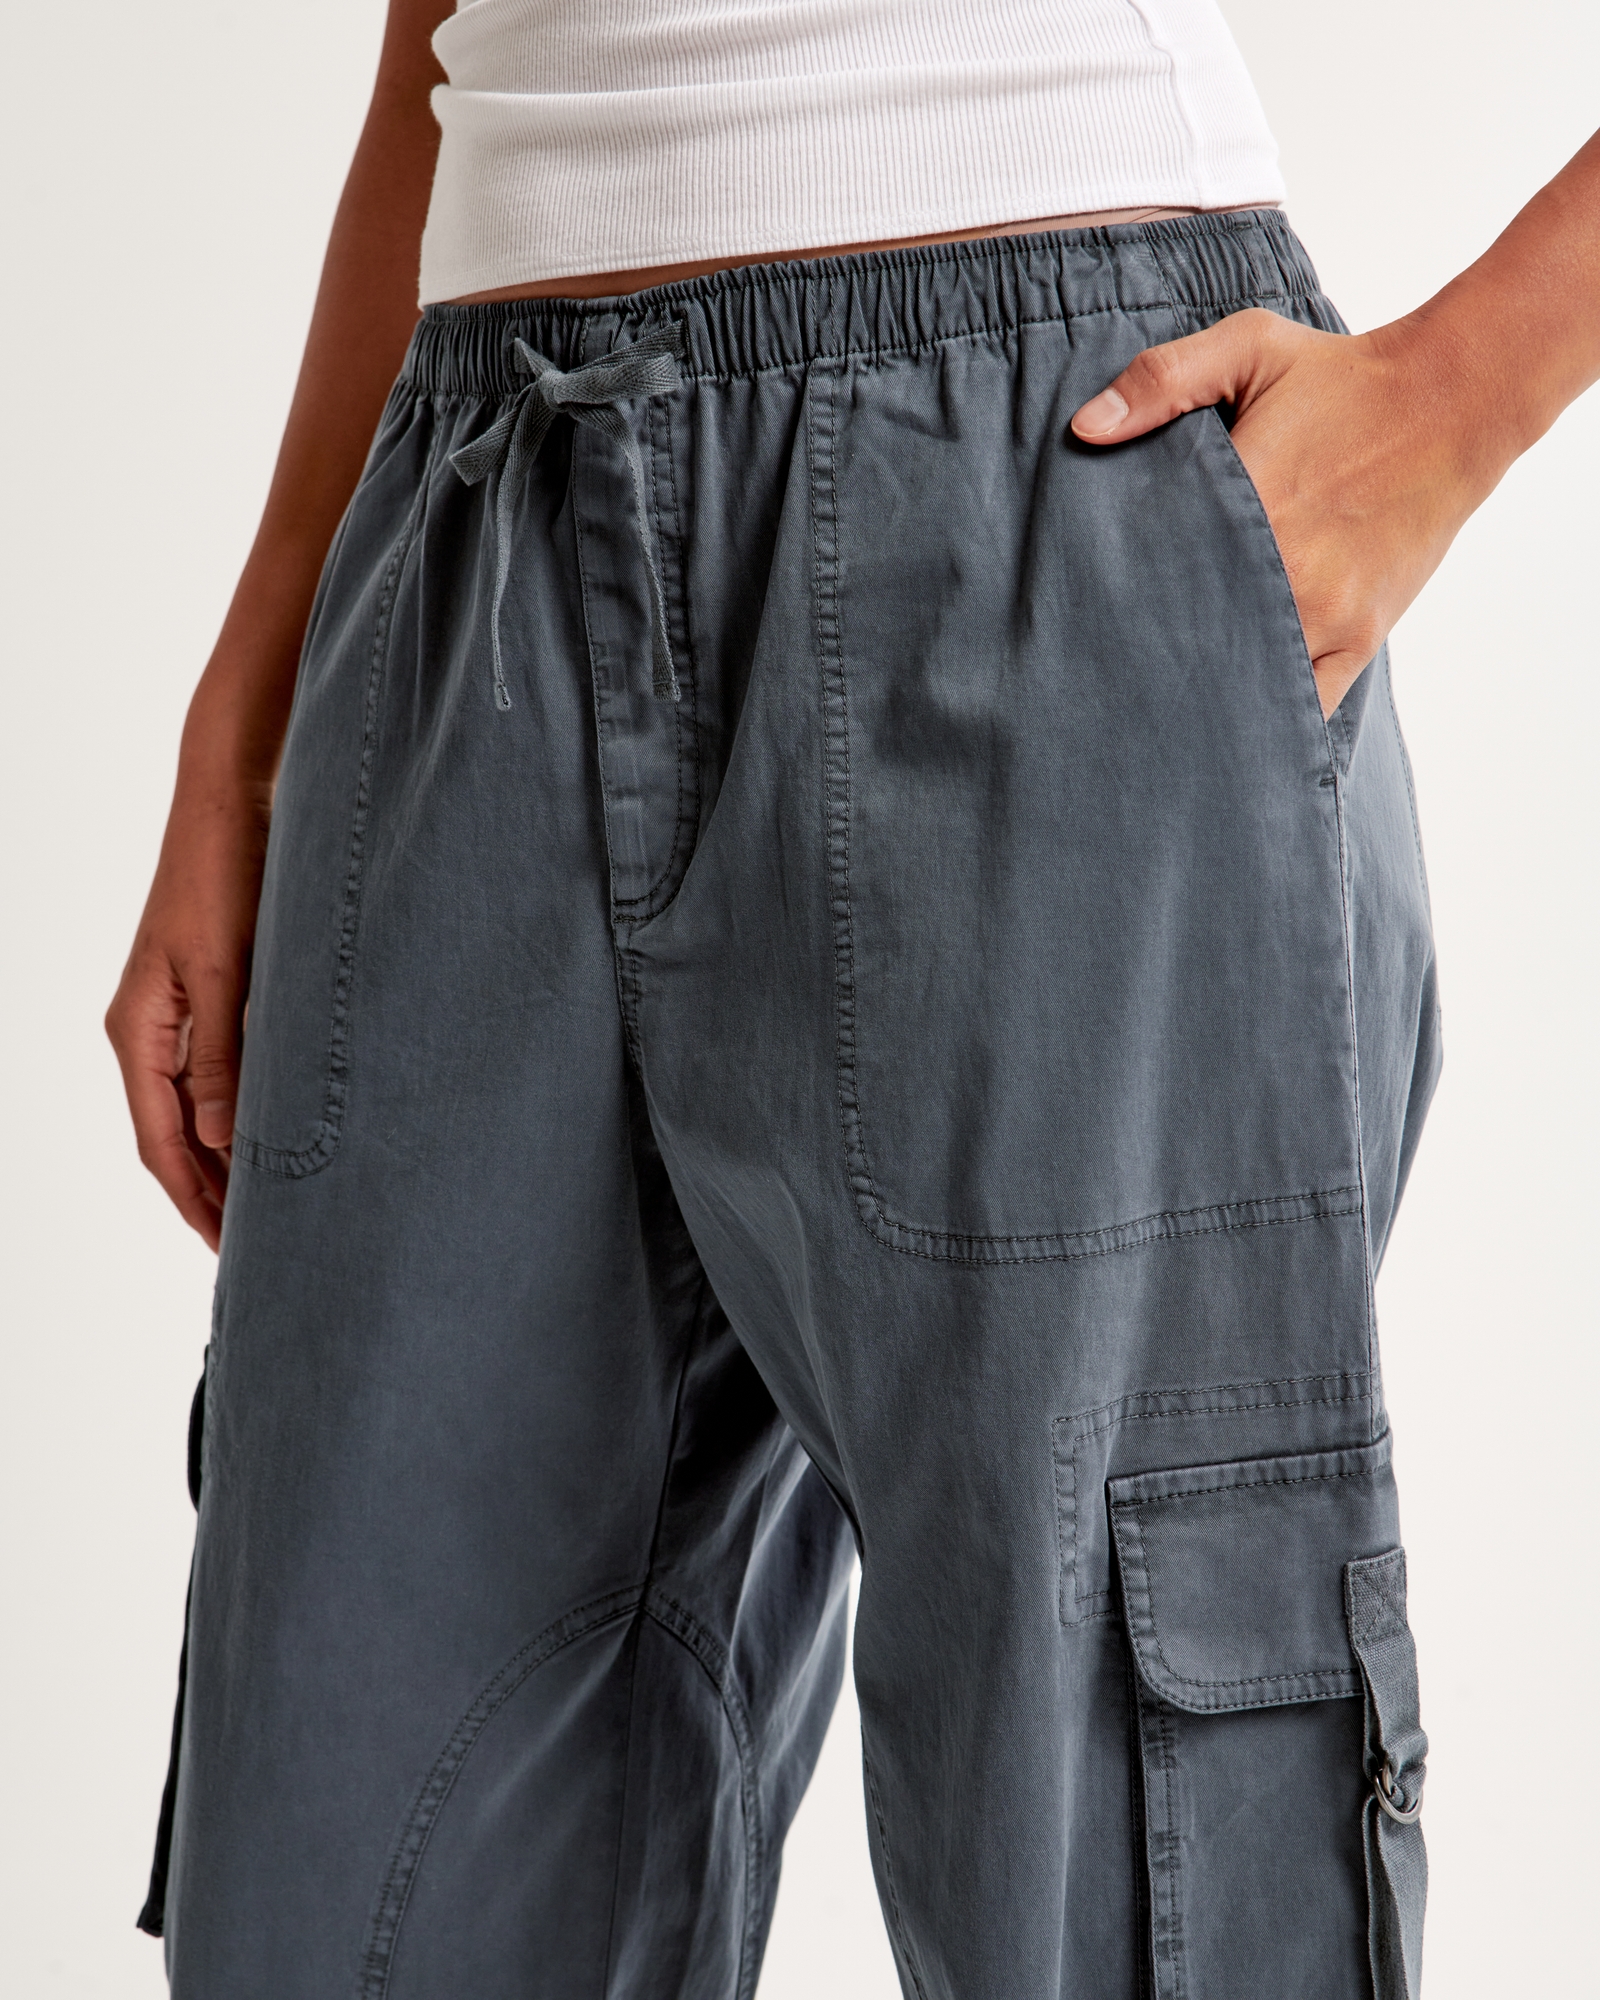 High Waisted Baggy Cargo Pants from Apollo Box